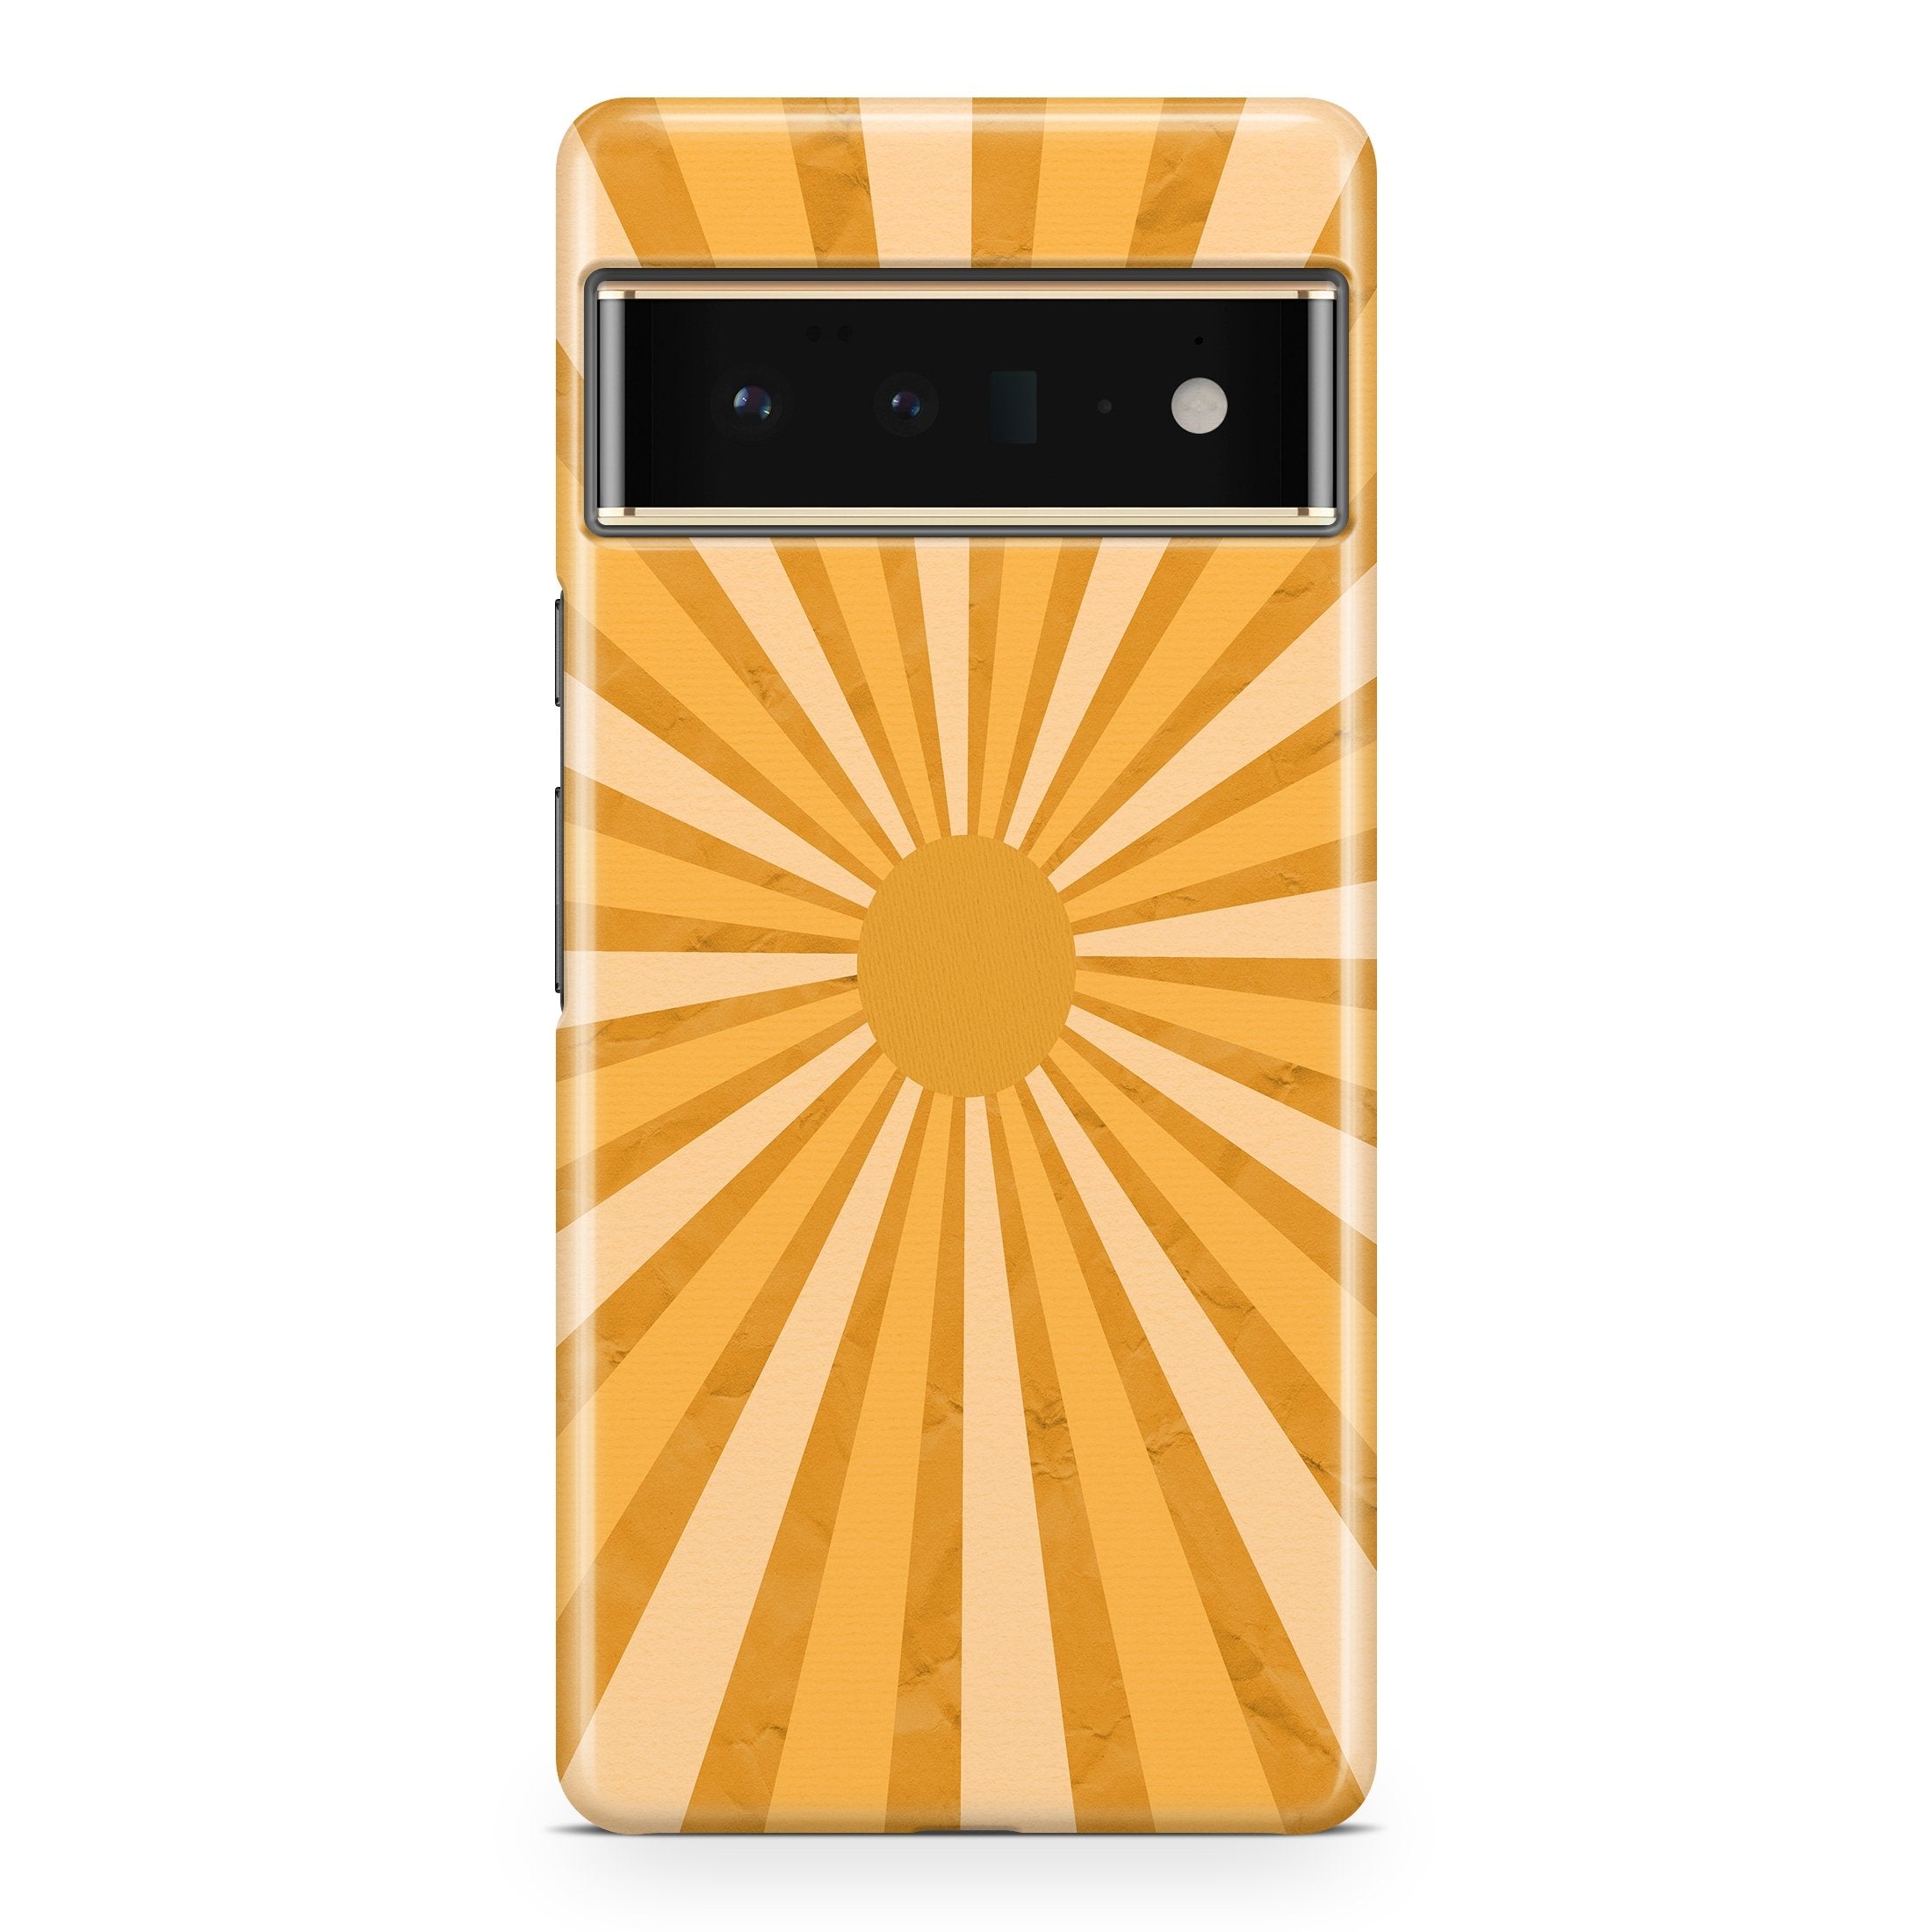 Retro Sunlight - Google phone case designs by CaseSwagger